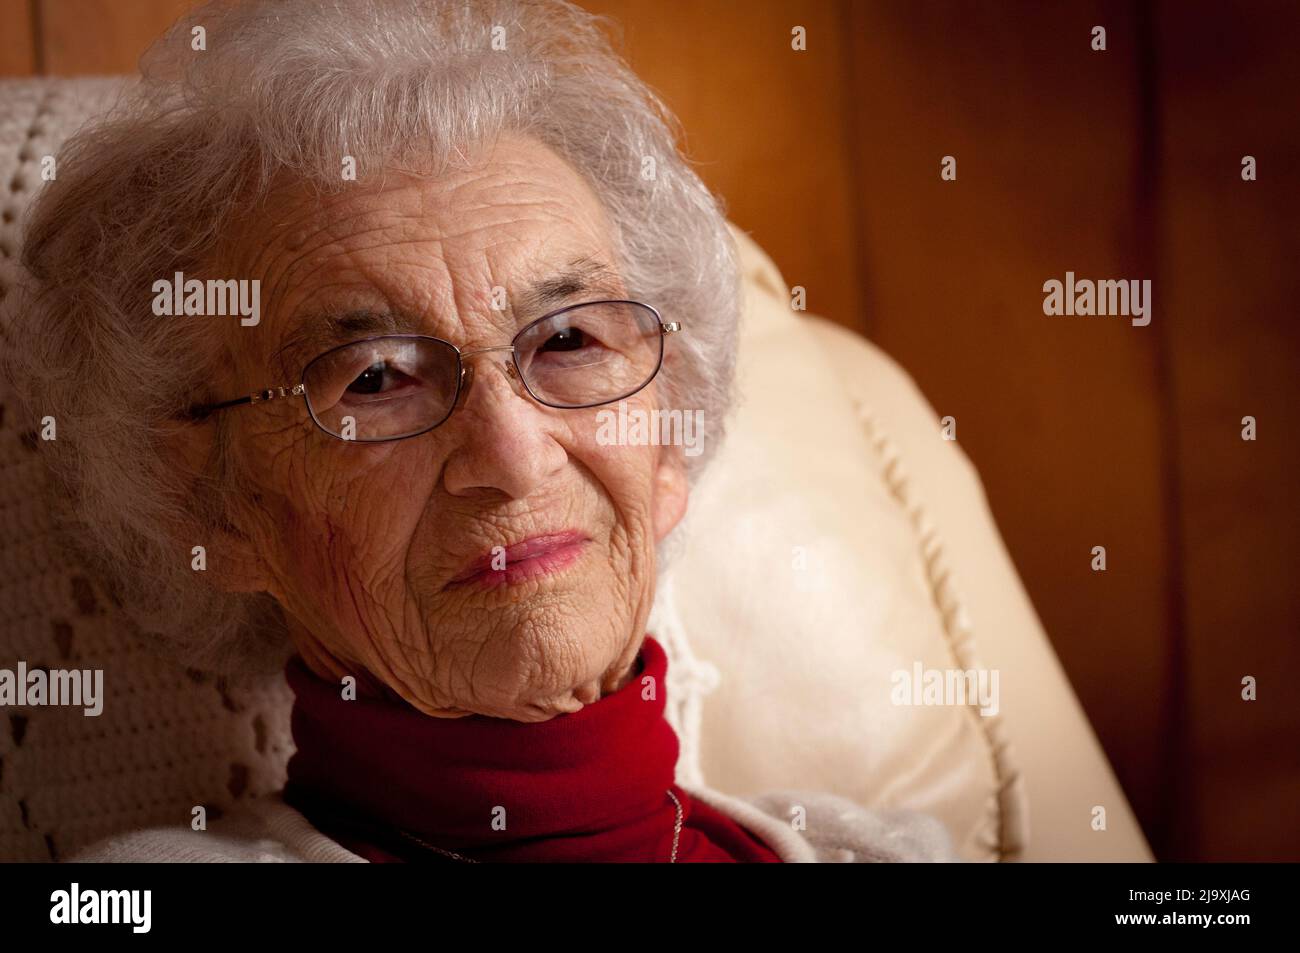 Portrait of an elderly woman sitting on a chair and looking at the camera Stock Photo